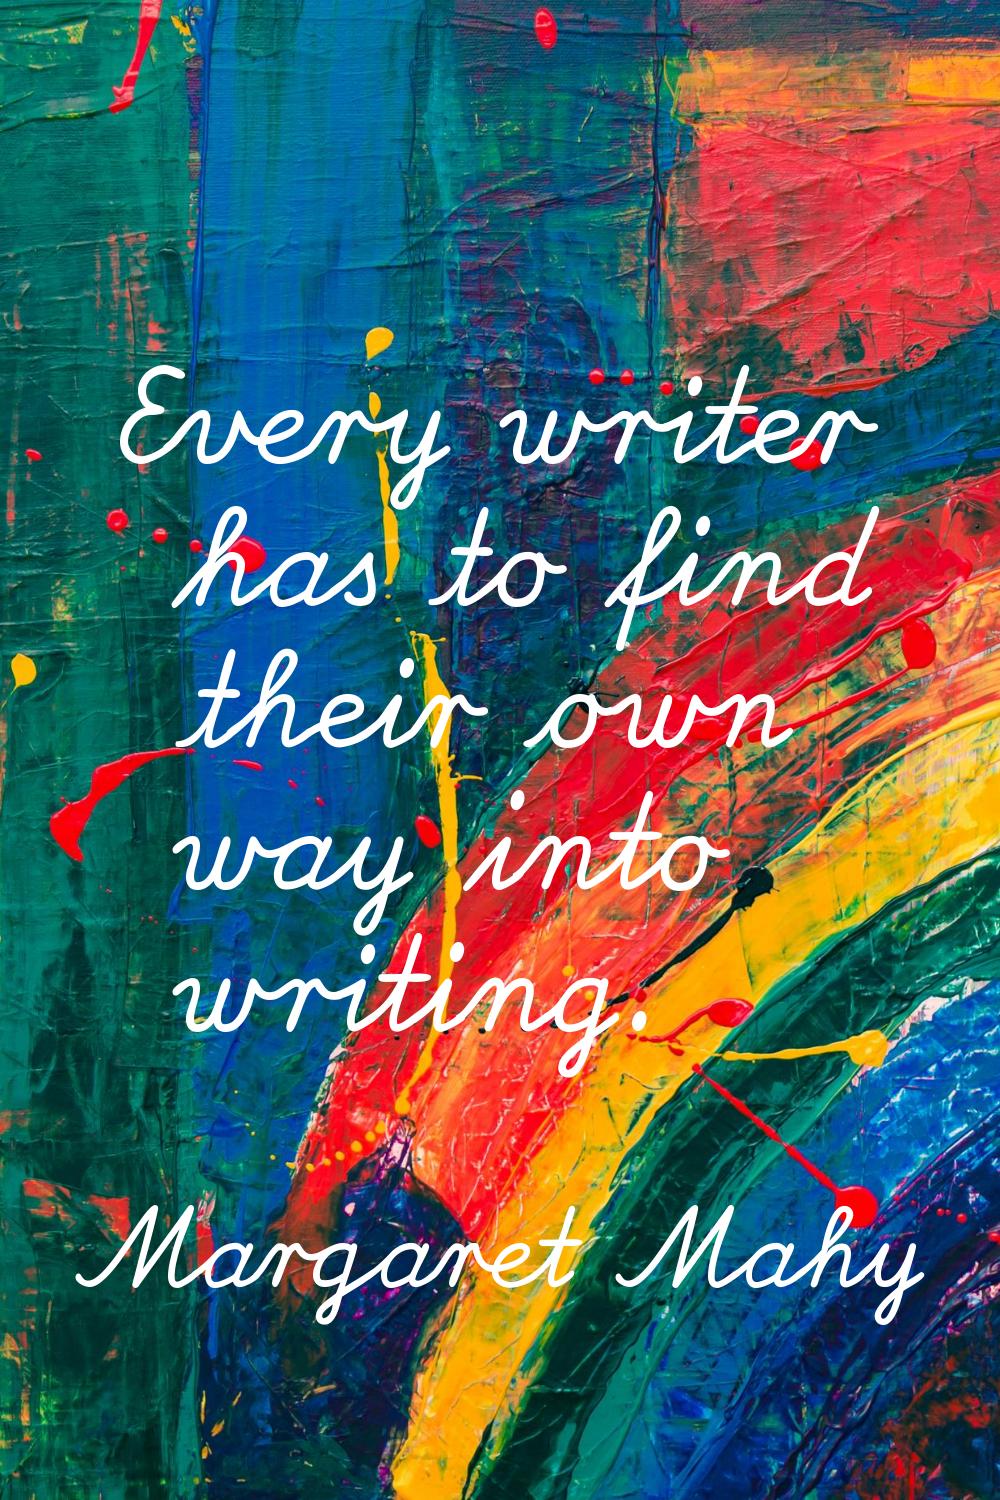 Every writer has to find their own way into writing.